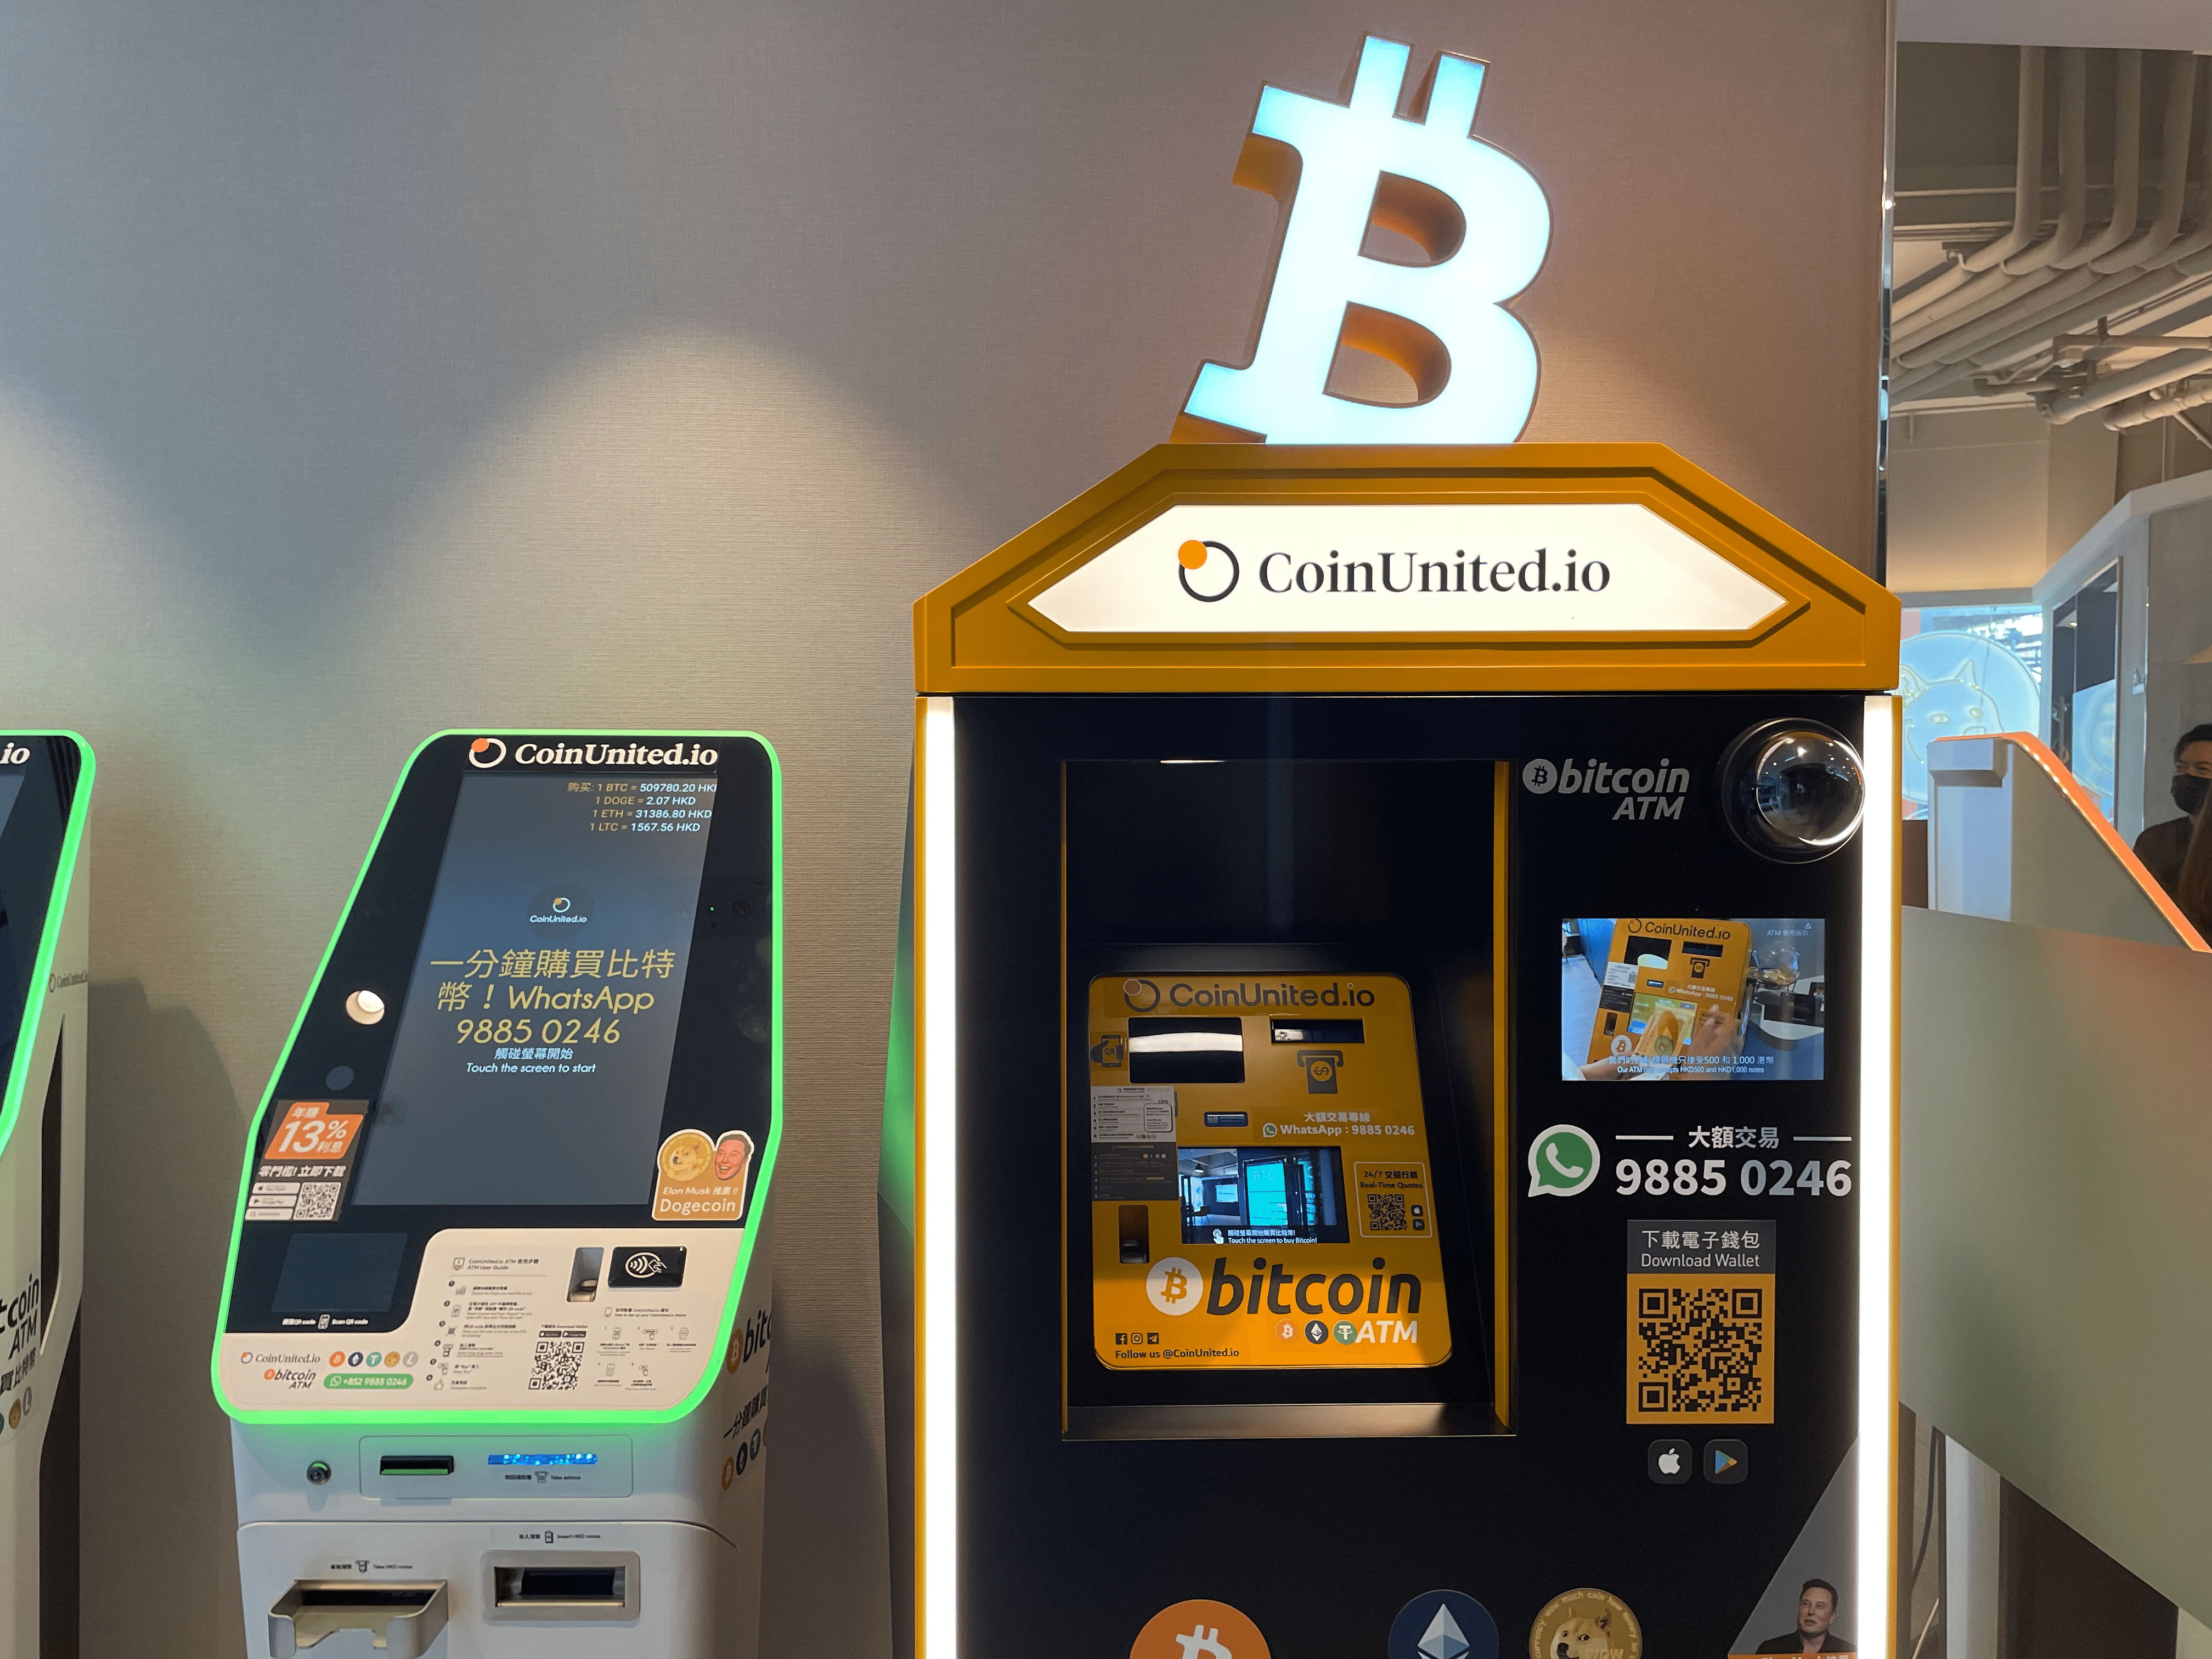 How to Use a Bitcoin ATM - How To Withdraw & Deposit Cash? - CaptainAltcoin